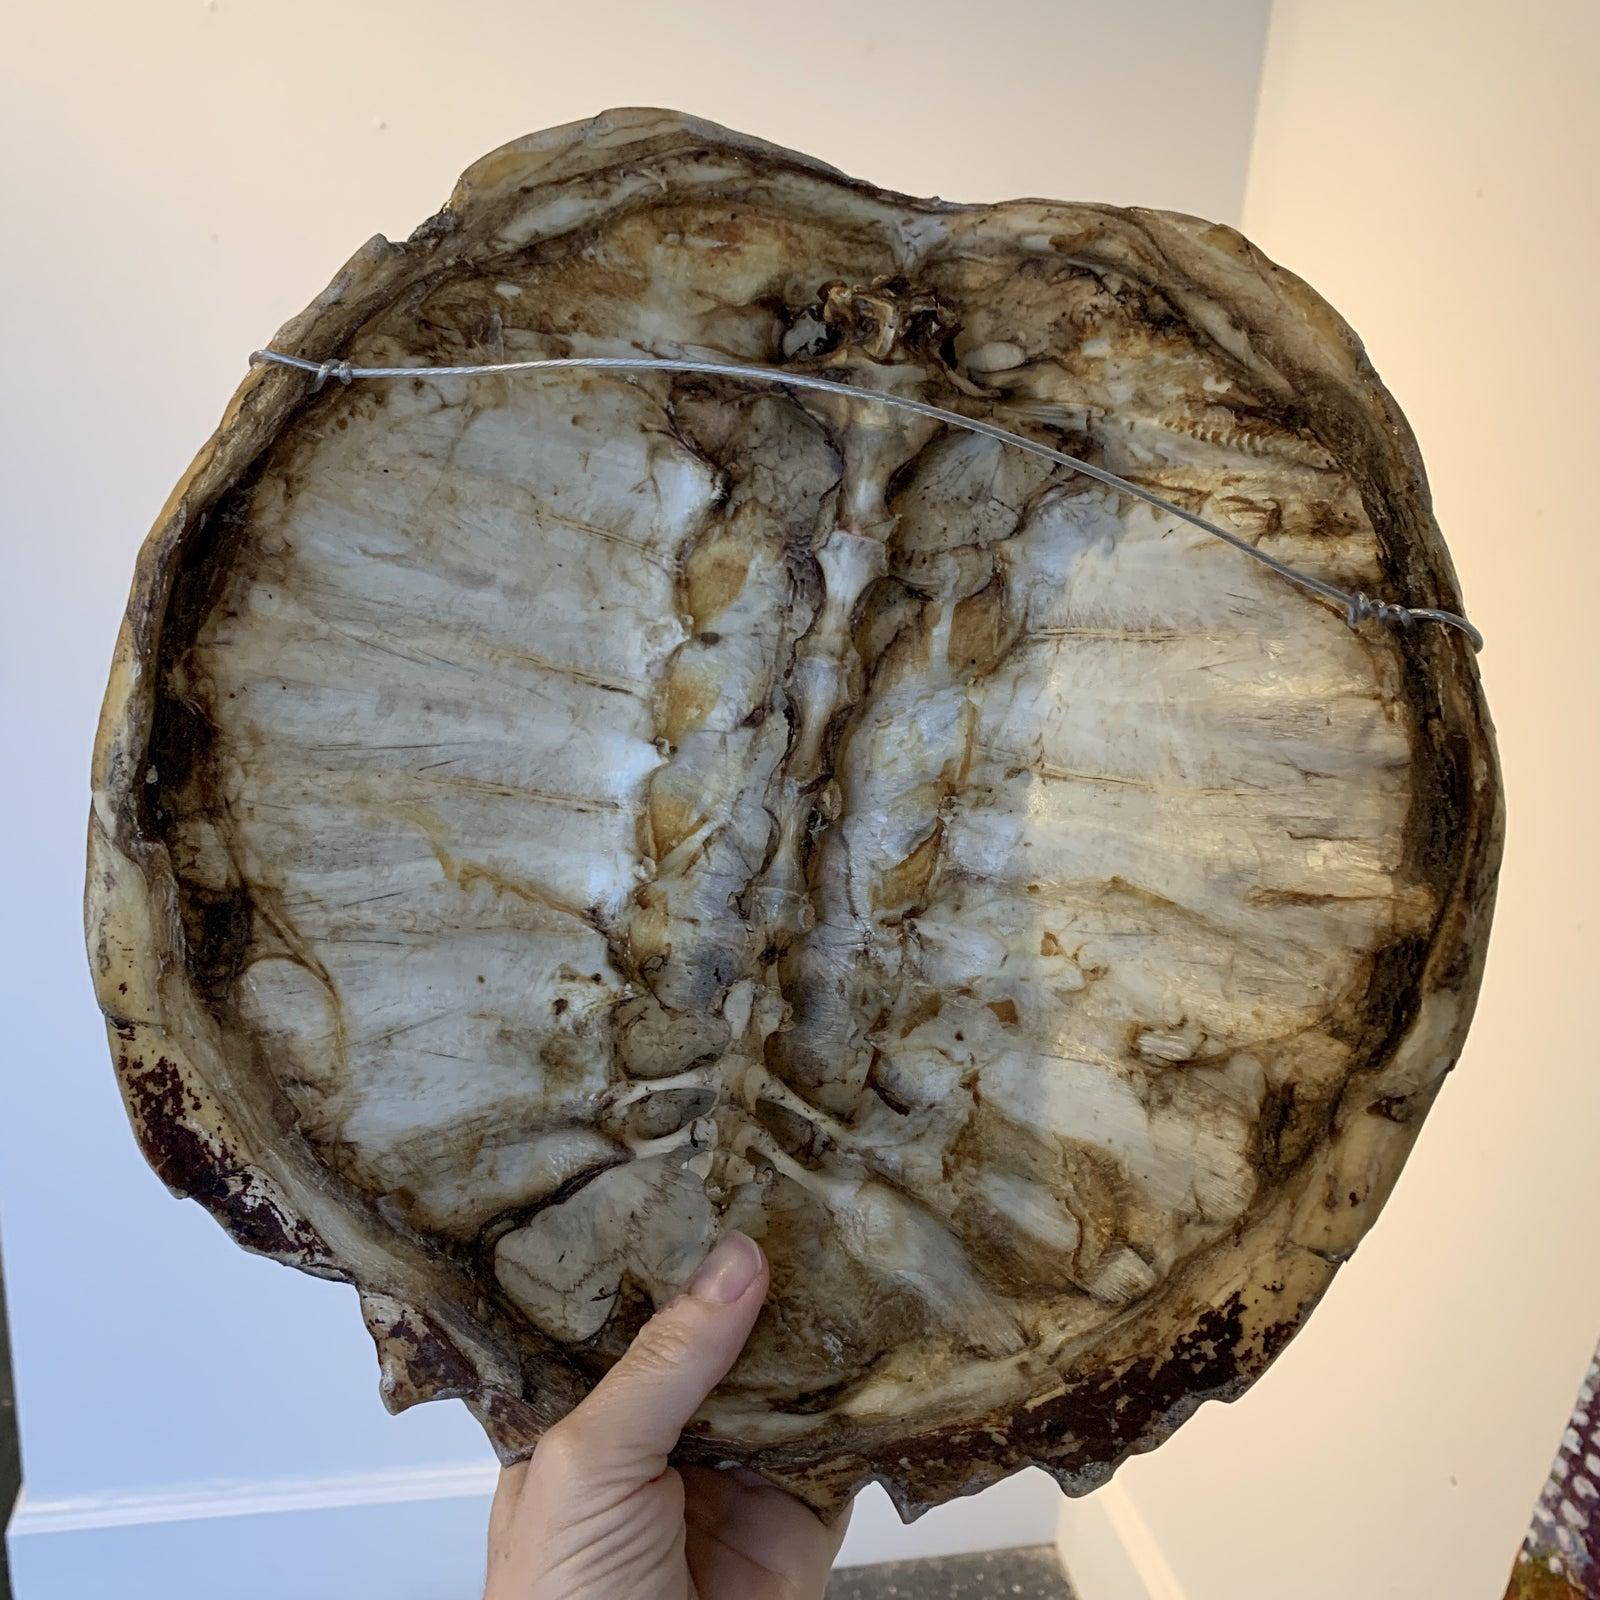 Real authentic turtle shell.
Color Dark Brown
wired for hacking or you can simply lay on a table.
Small chip less than dime size. This piece is real and has natural flaws.
Would be great on a stand however it is wired for wall hanging. 

ADAC